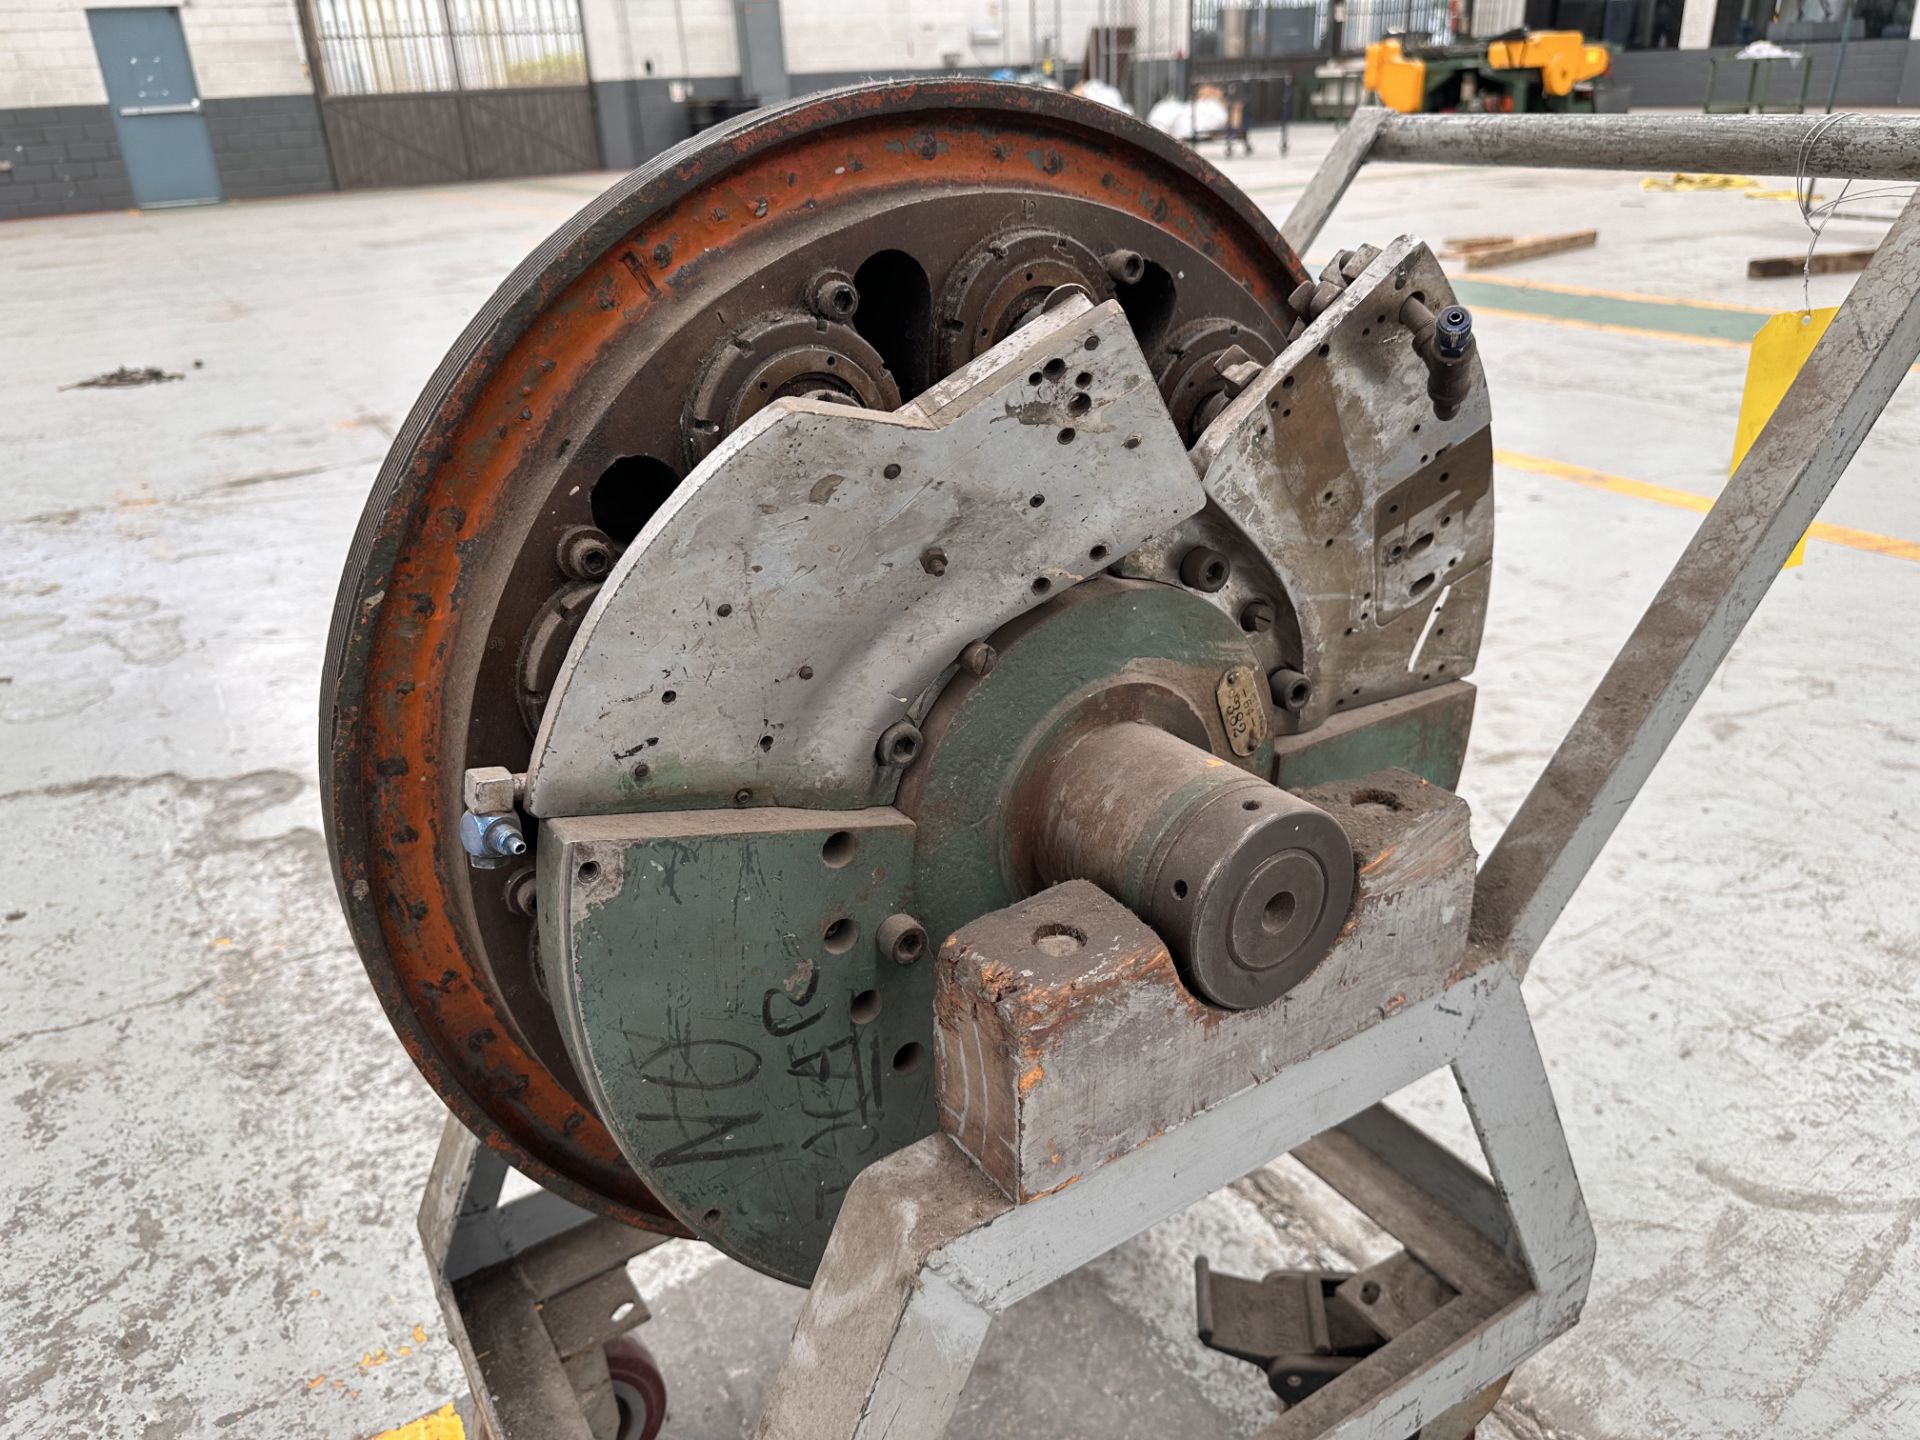 Owens Cap threading machine, Model ND, Serial No. S/S, Year ND, Incomplete, parts only, please insp - Image 4 of 7